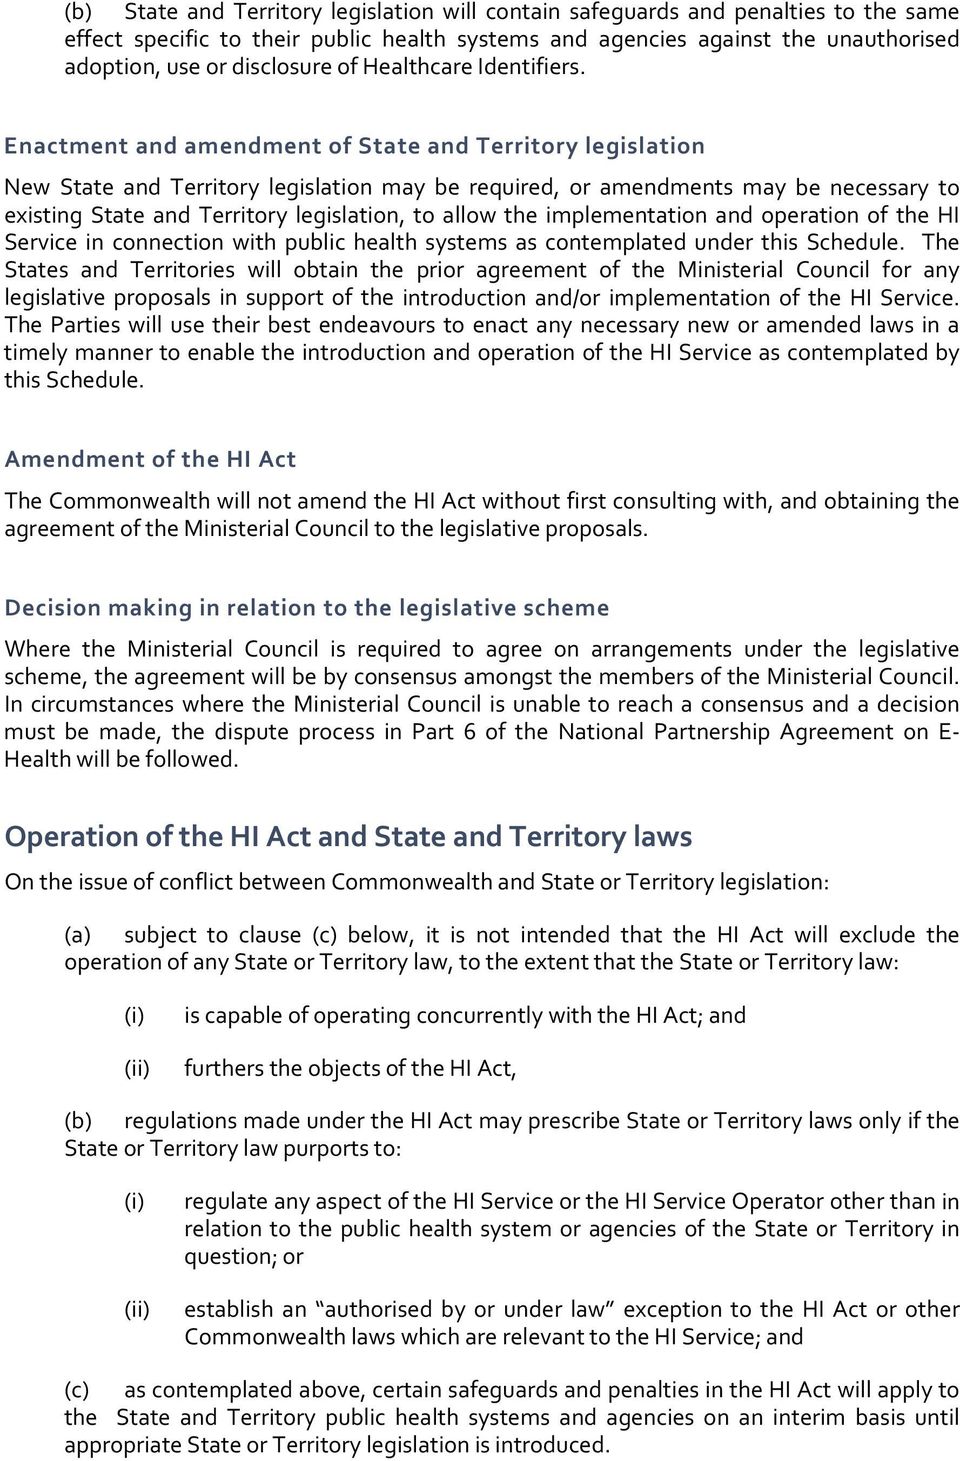 Enactment and amendment of State and Territory legislation New State and Territory legislation may be required, or amendments may be necessary to existing State and Territory legislation, to allow